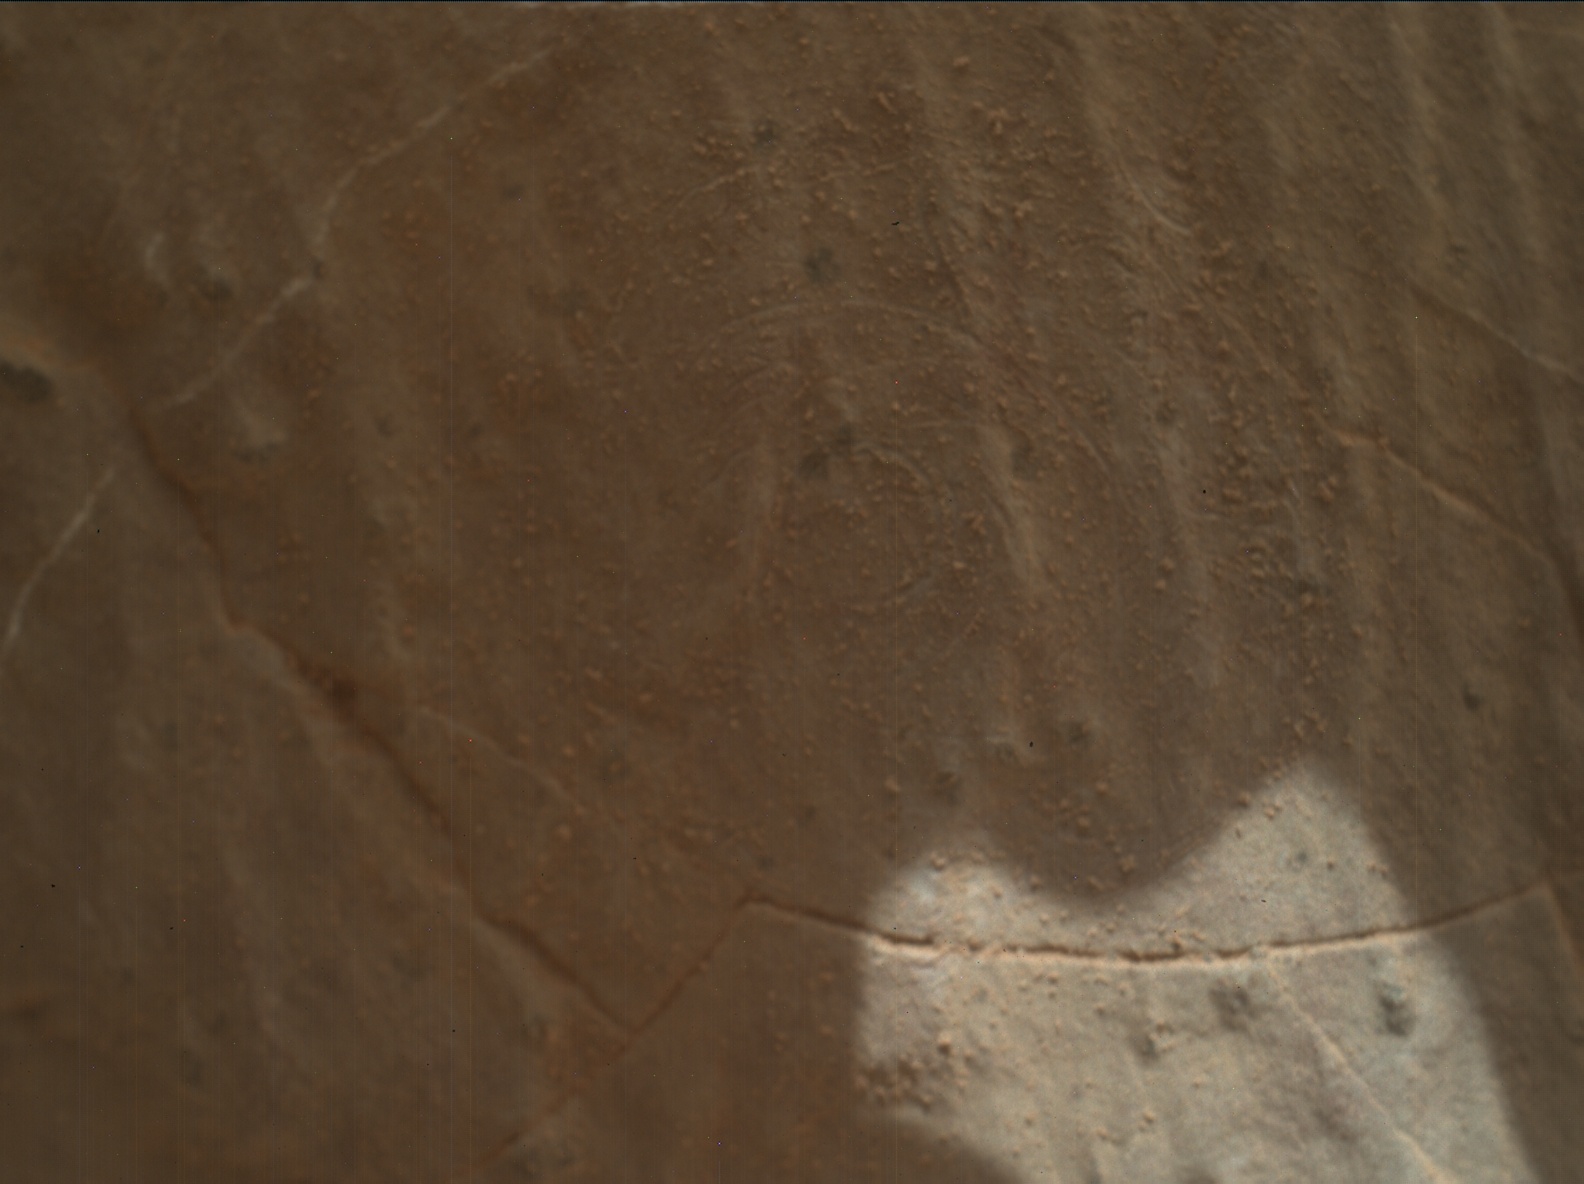 Nasa's Mars rover Curiosity acquired this image using its Mars Hand Lens Imager (MAHLI) on Sol 2749